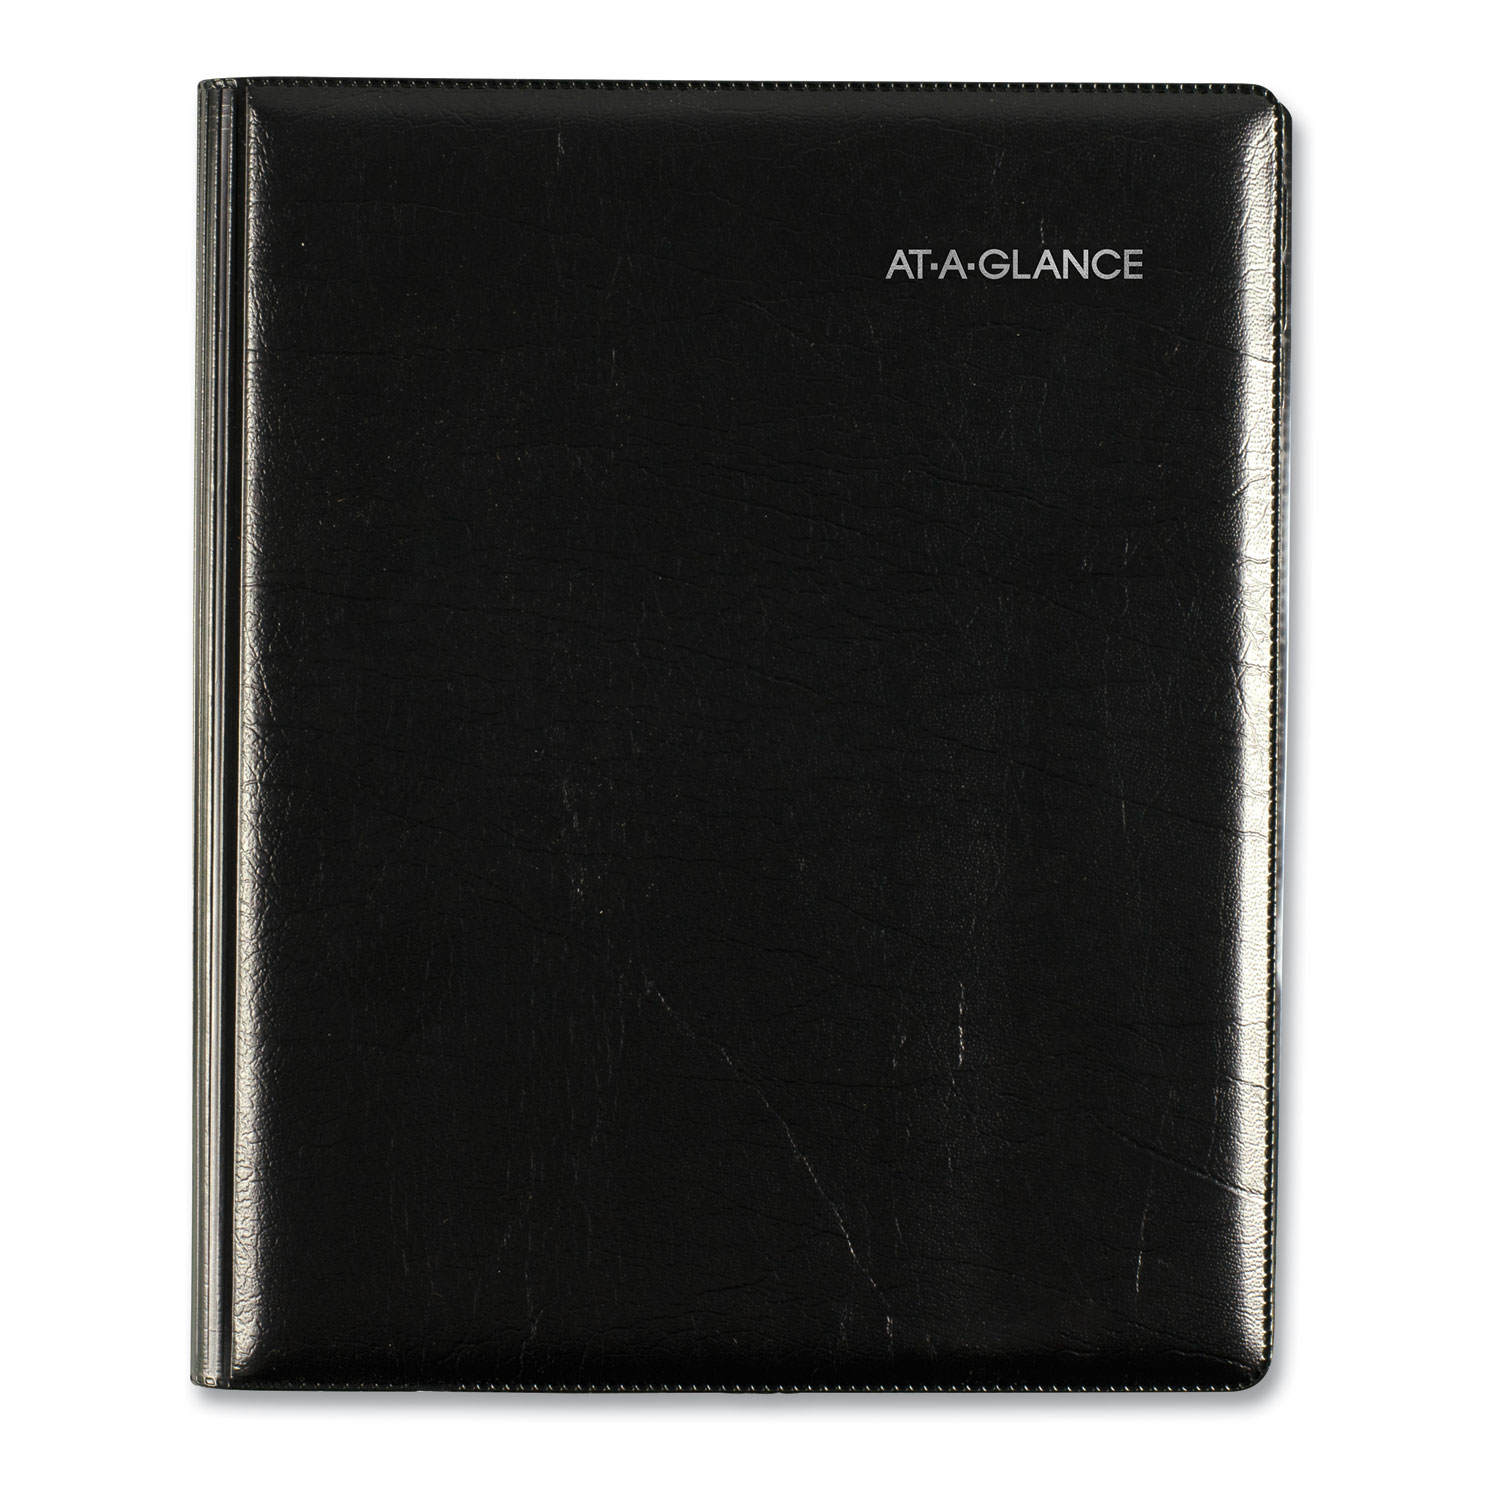  AT-A-GLANCE G545-00 Executive Weekly/Monthly Planner, 8 3/4 x 6 7/8, Black, 2020 (AAGG54500) 